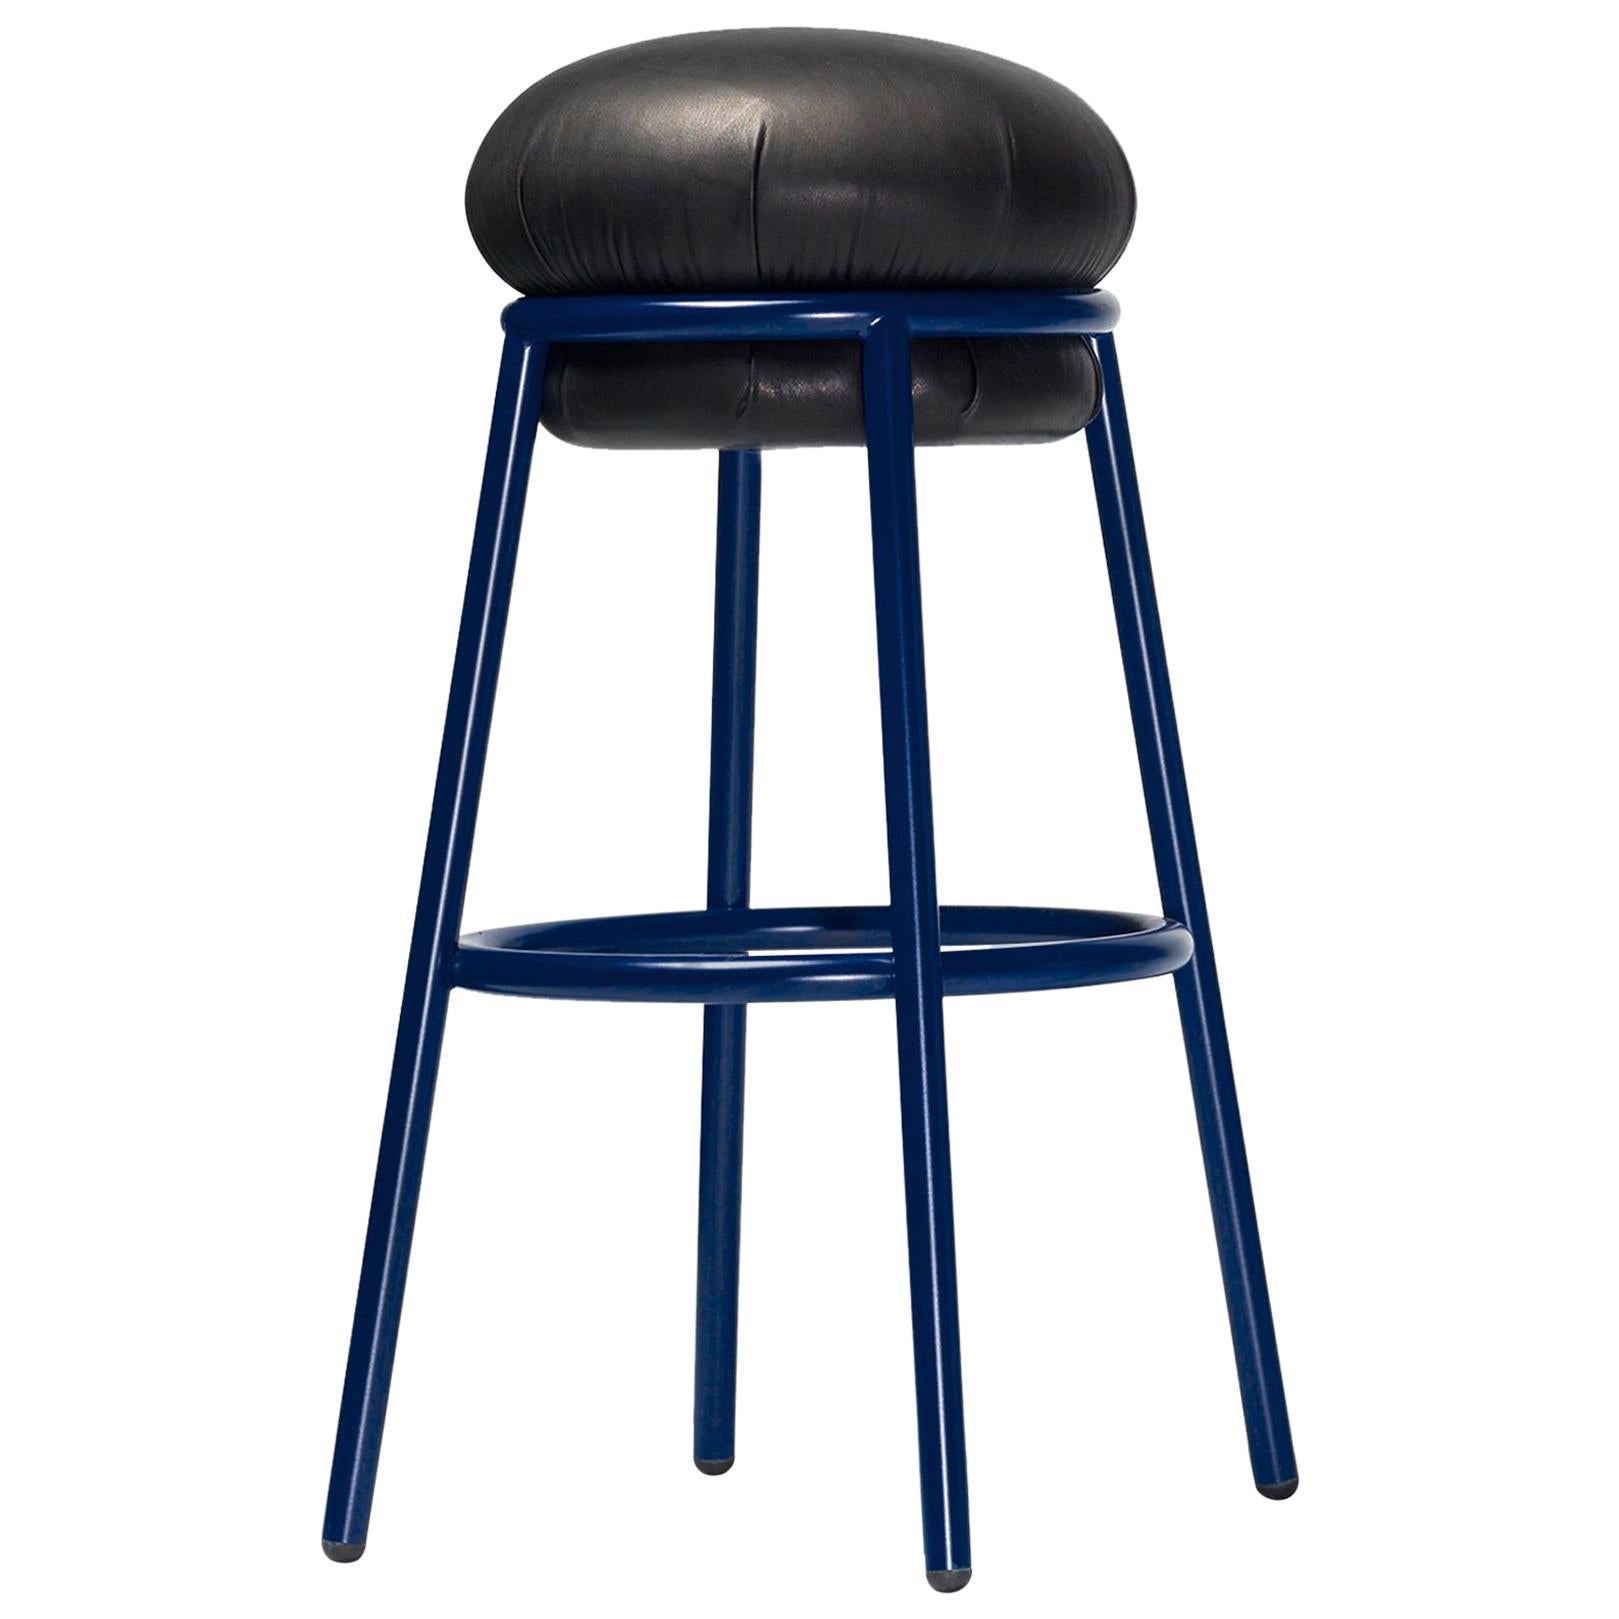 Grasso Stool in Black Leather with Blue Legs by BD Barcelona